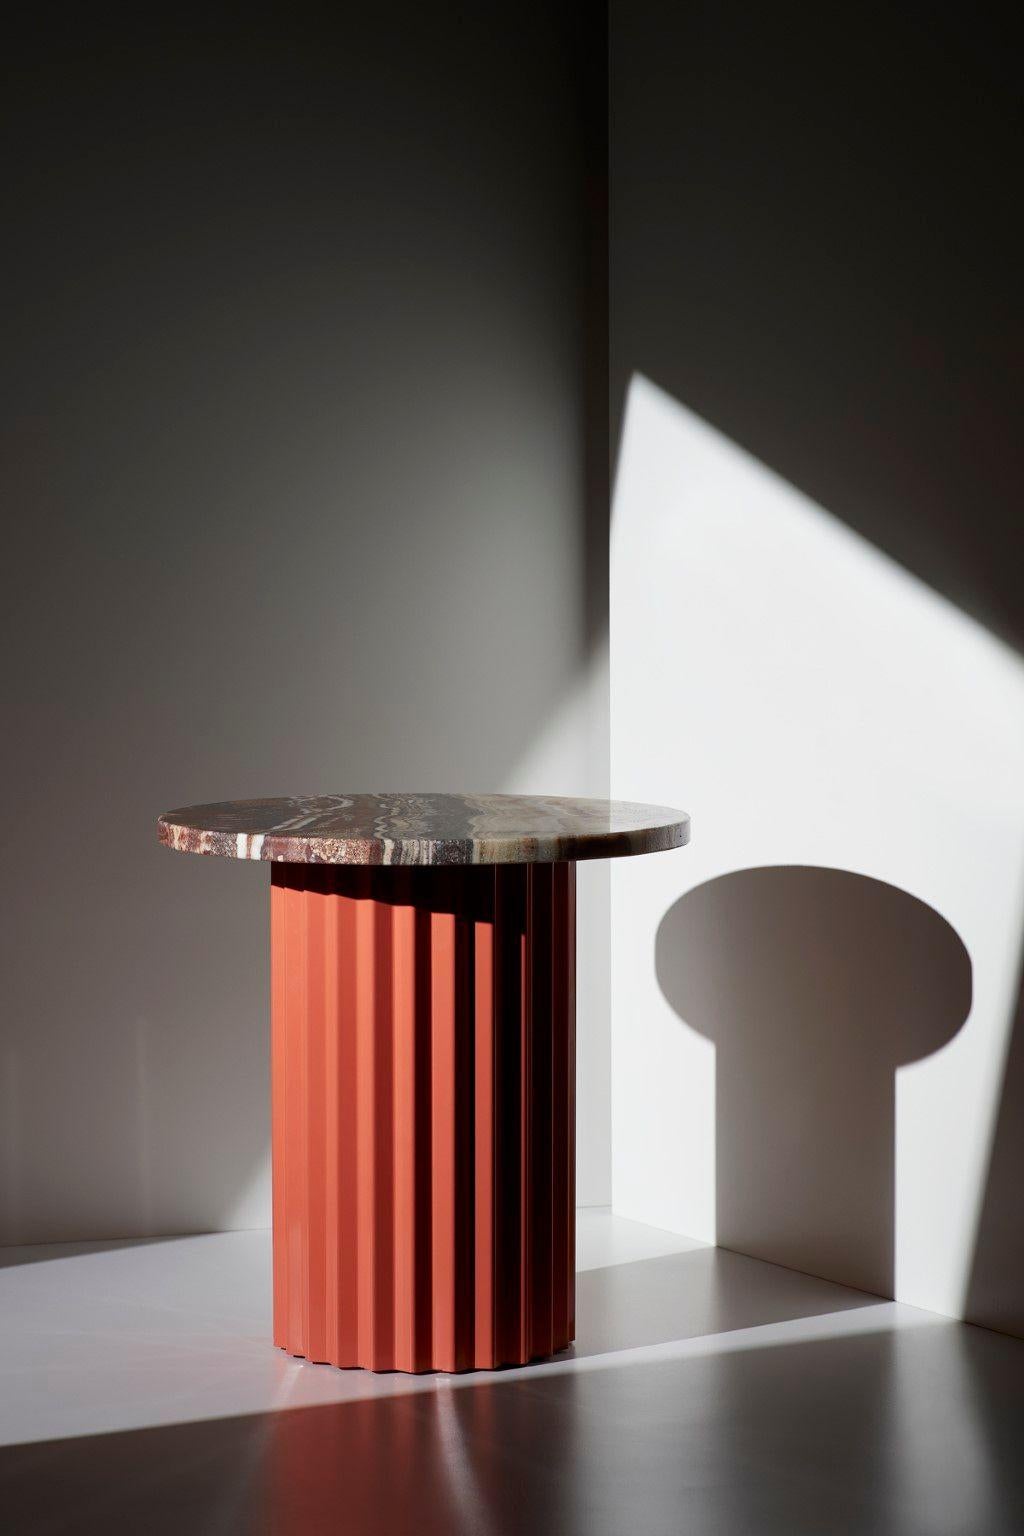 Column lounge table with Marble 40 by Lisette Rützou
Dimensions: D 40 x H 41 cm
Materials: Marble, Onyx
Also available in Ø 60

2Lisette Rützou’s design is motivated by an urge to articulate a story. Inspired by the beauty of materials, form